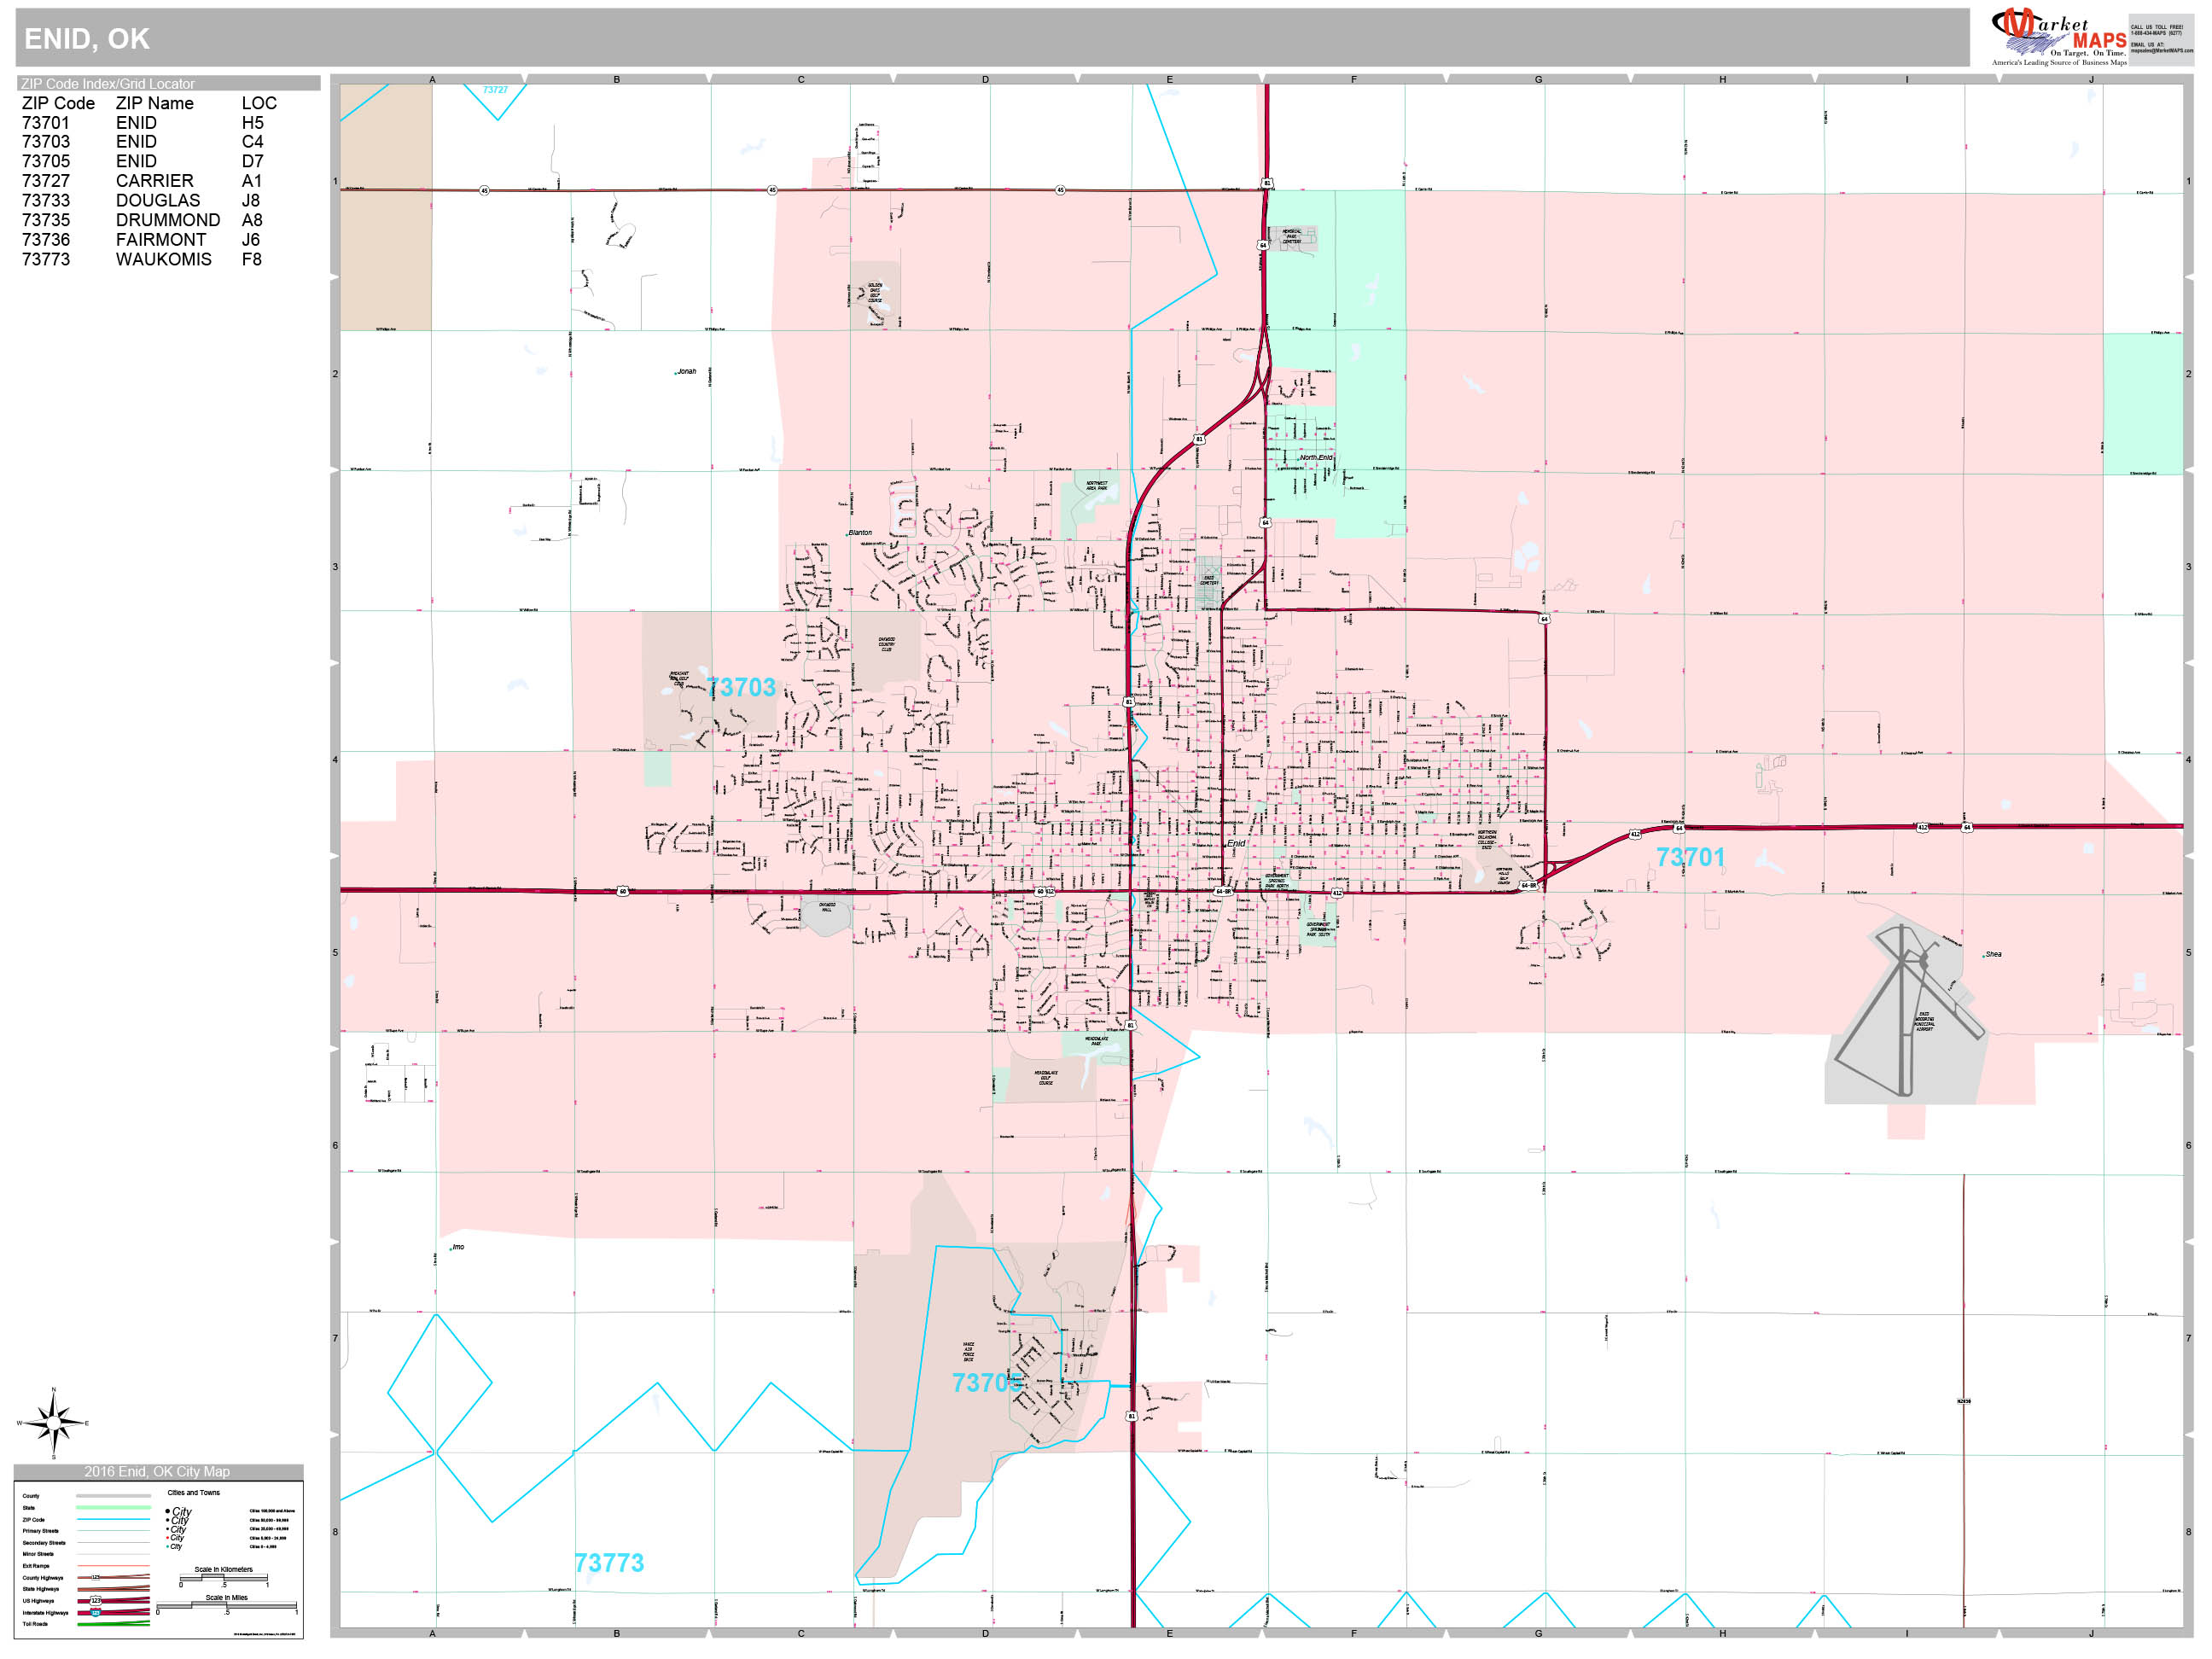 Enid Oklahoma Wall Map Premium Style By Marketmaps | Free Download Nude ...